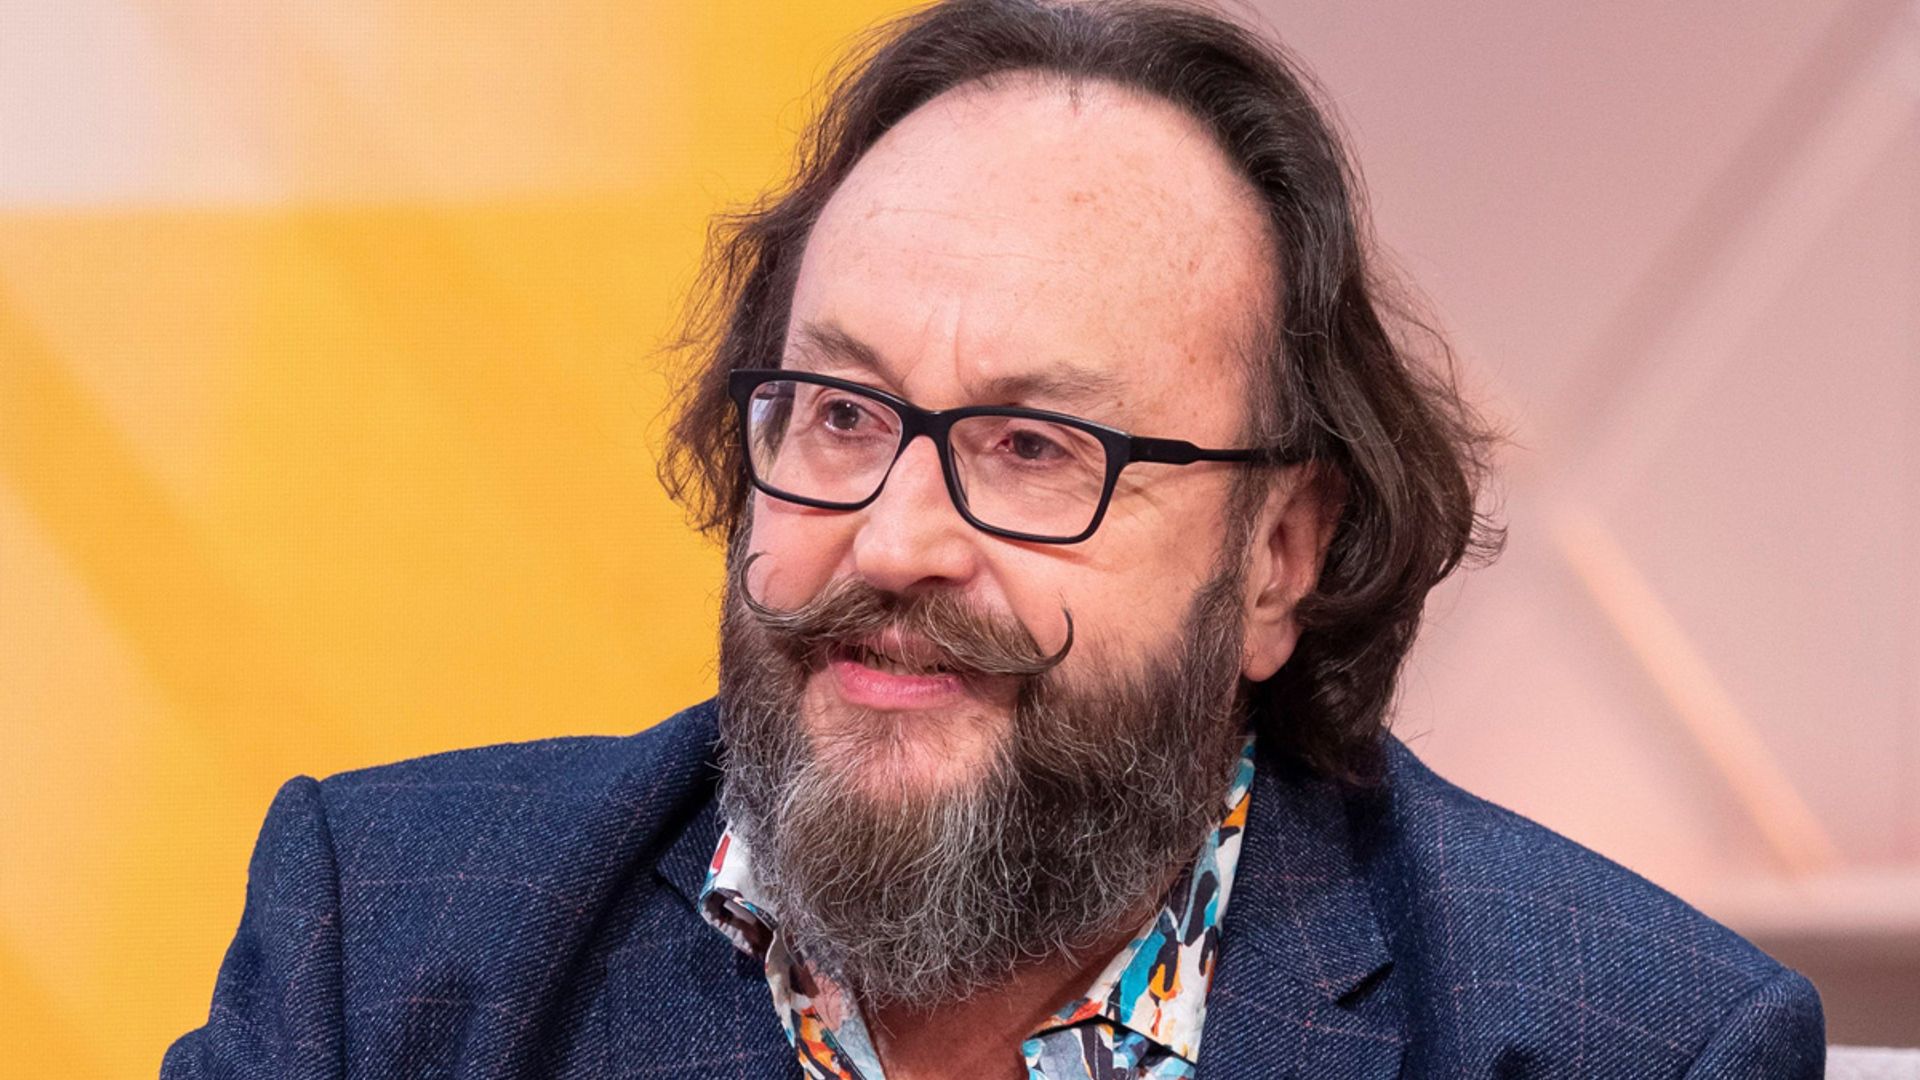 Hairy Bikers star Dave Myers first appearance amid cancer leaves fans tearful HELLO!